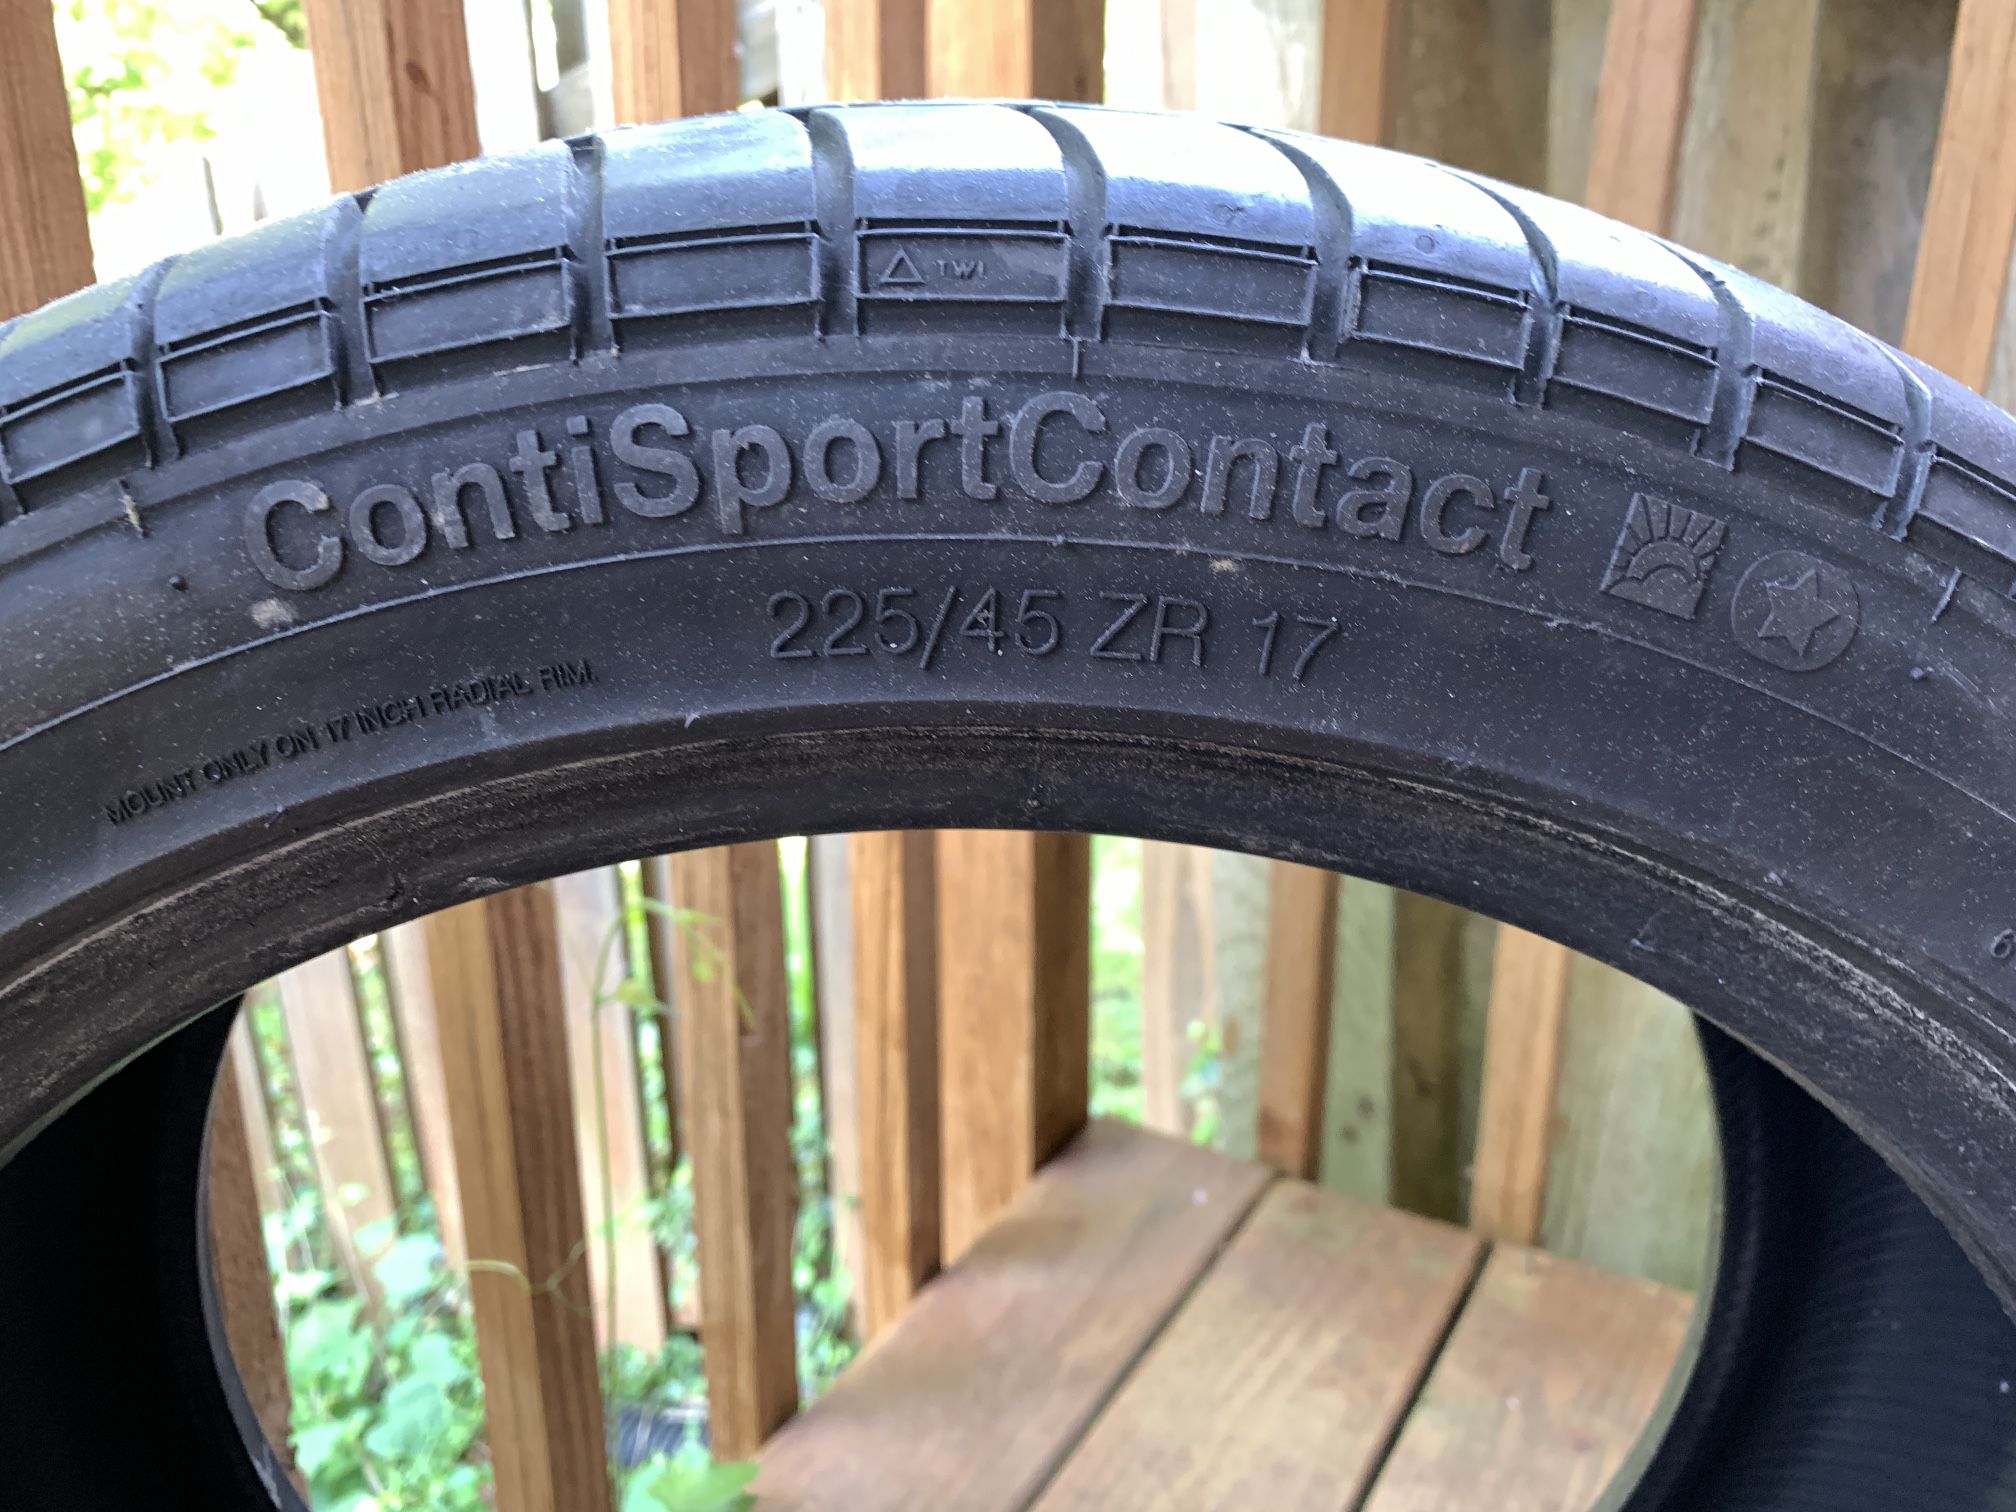 Continental Contisportcontact High Performance Tire